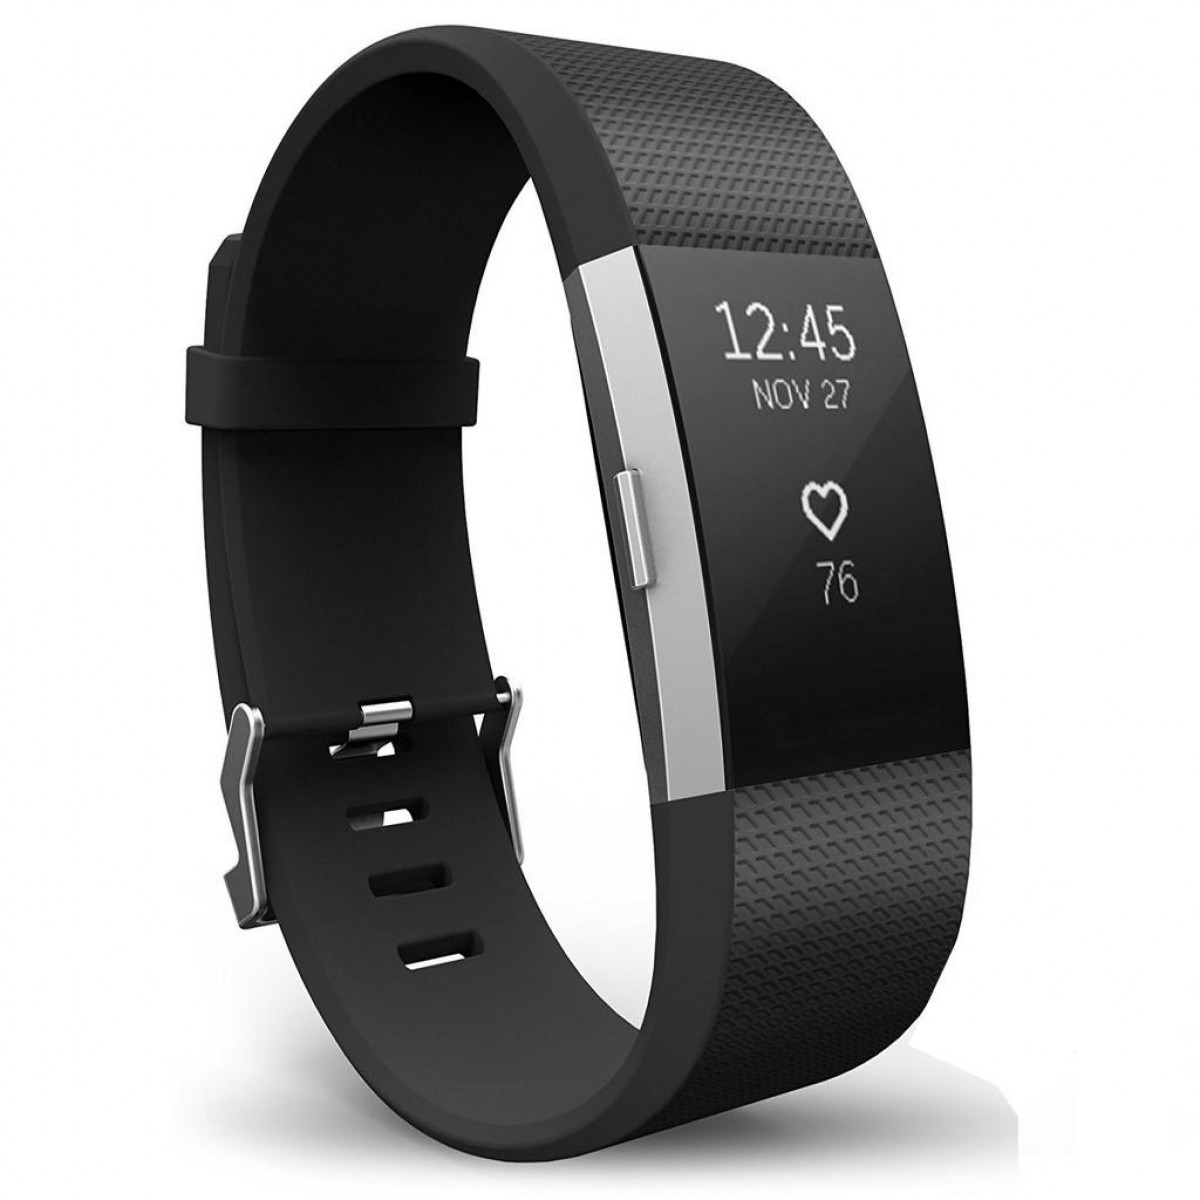 INF Fitbit Charge 2 2, Fitbit, Schwarz (S), Ersatzarmband, Armband Charge